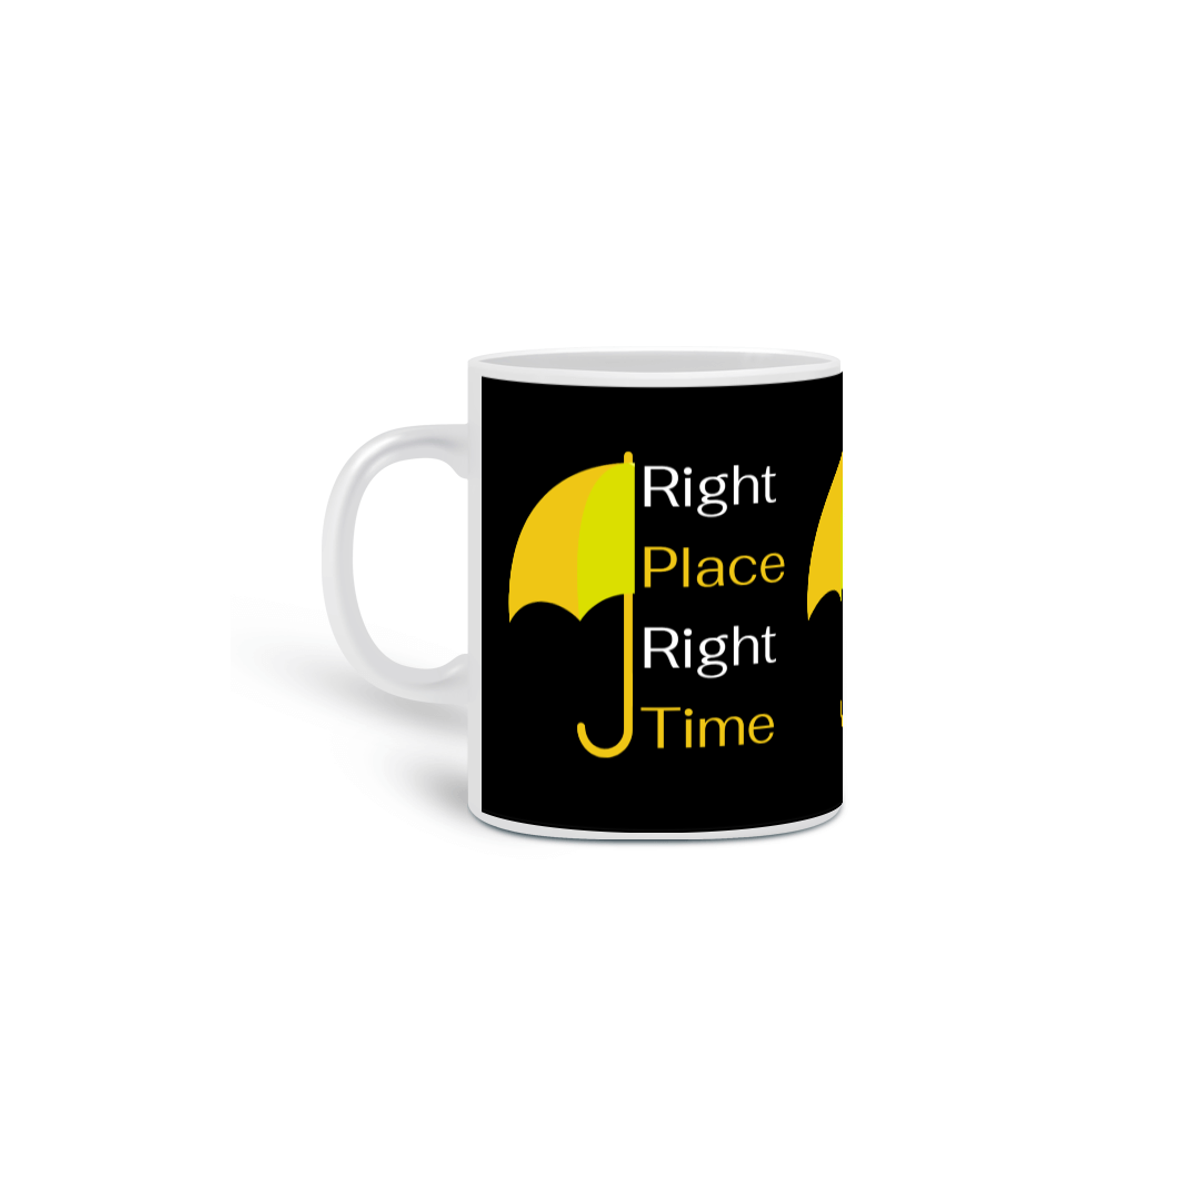 Nome do produto: Caneca Right Place Right Time - How i met your mother